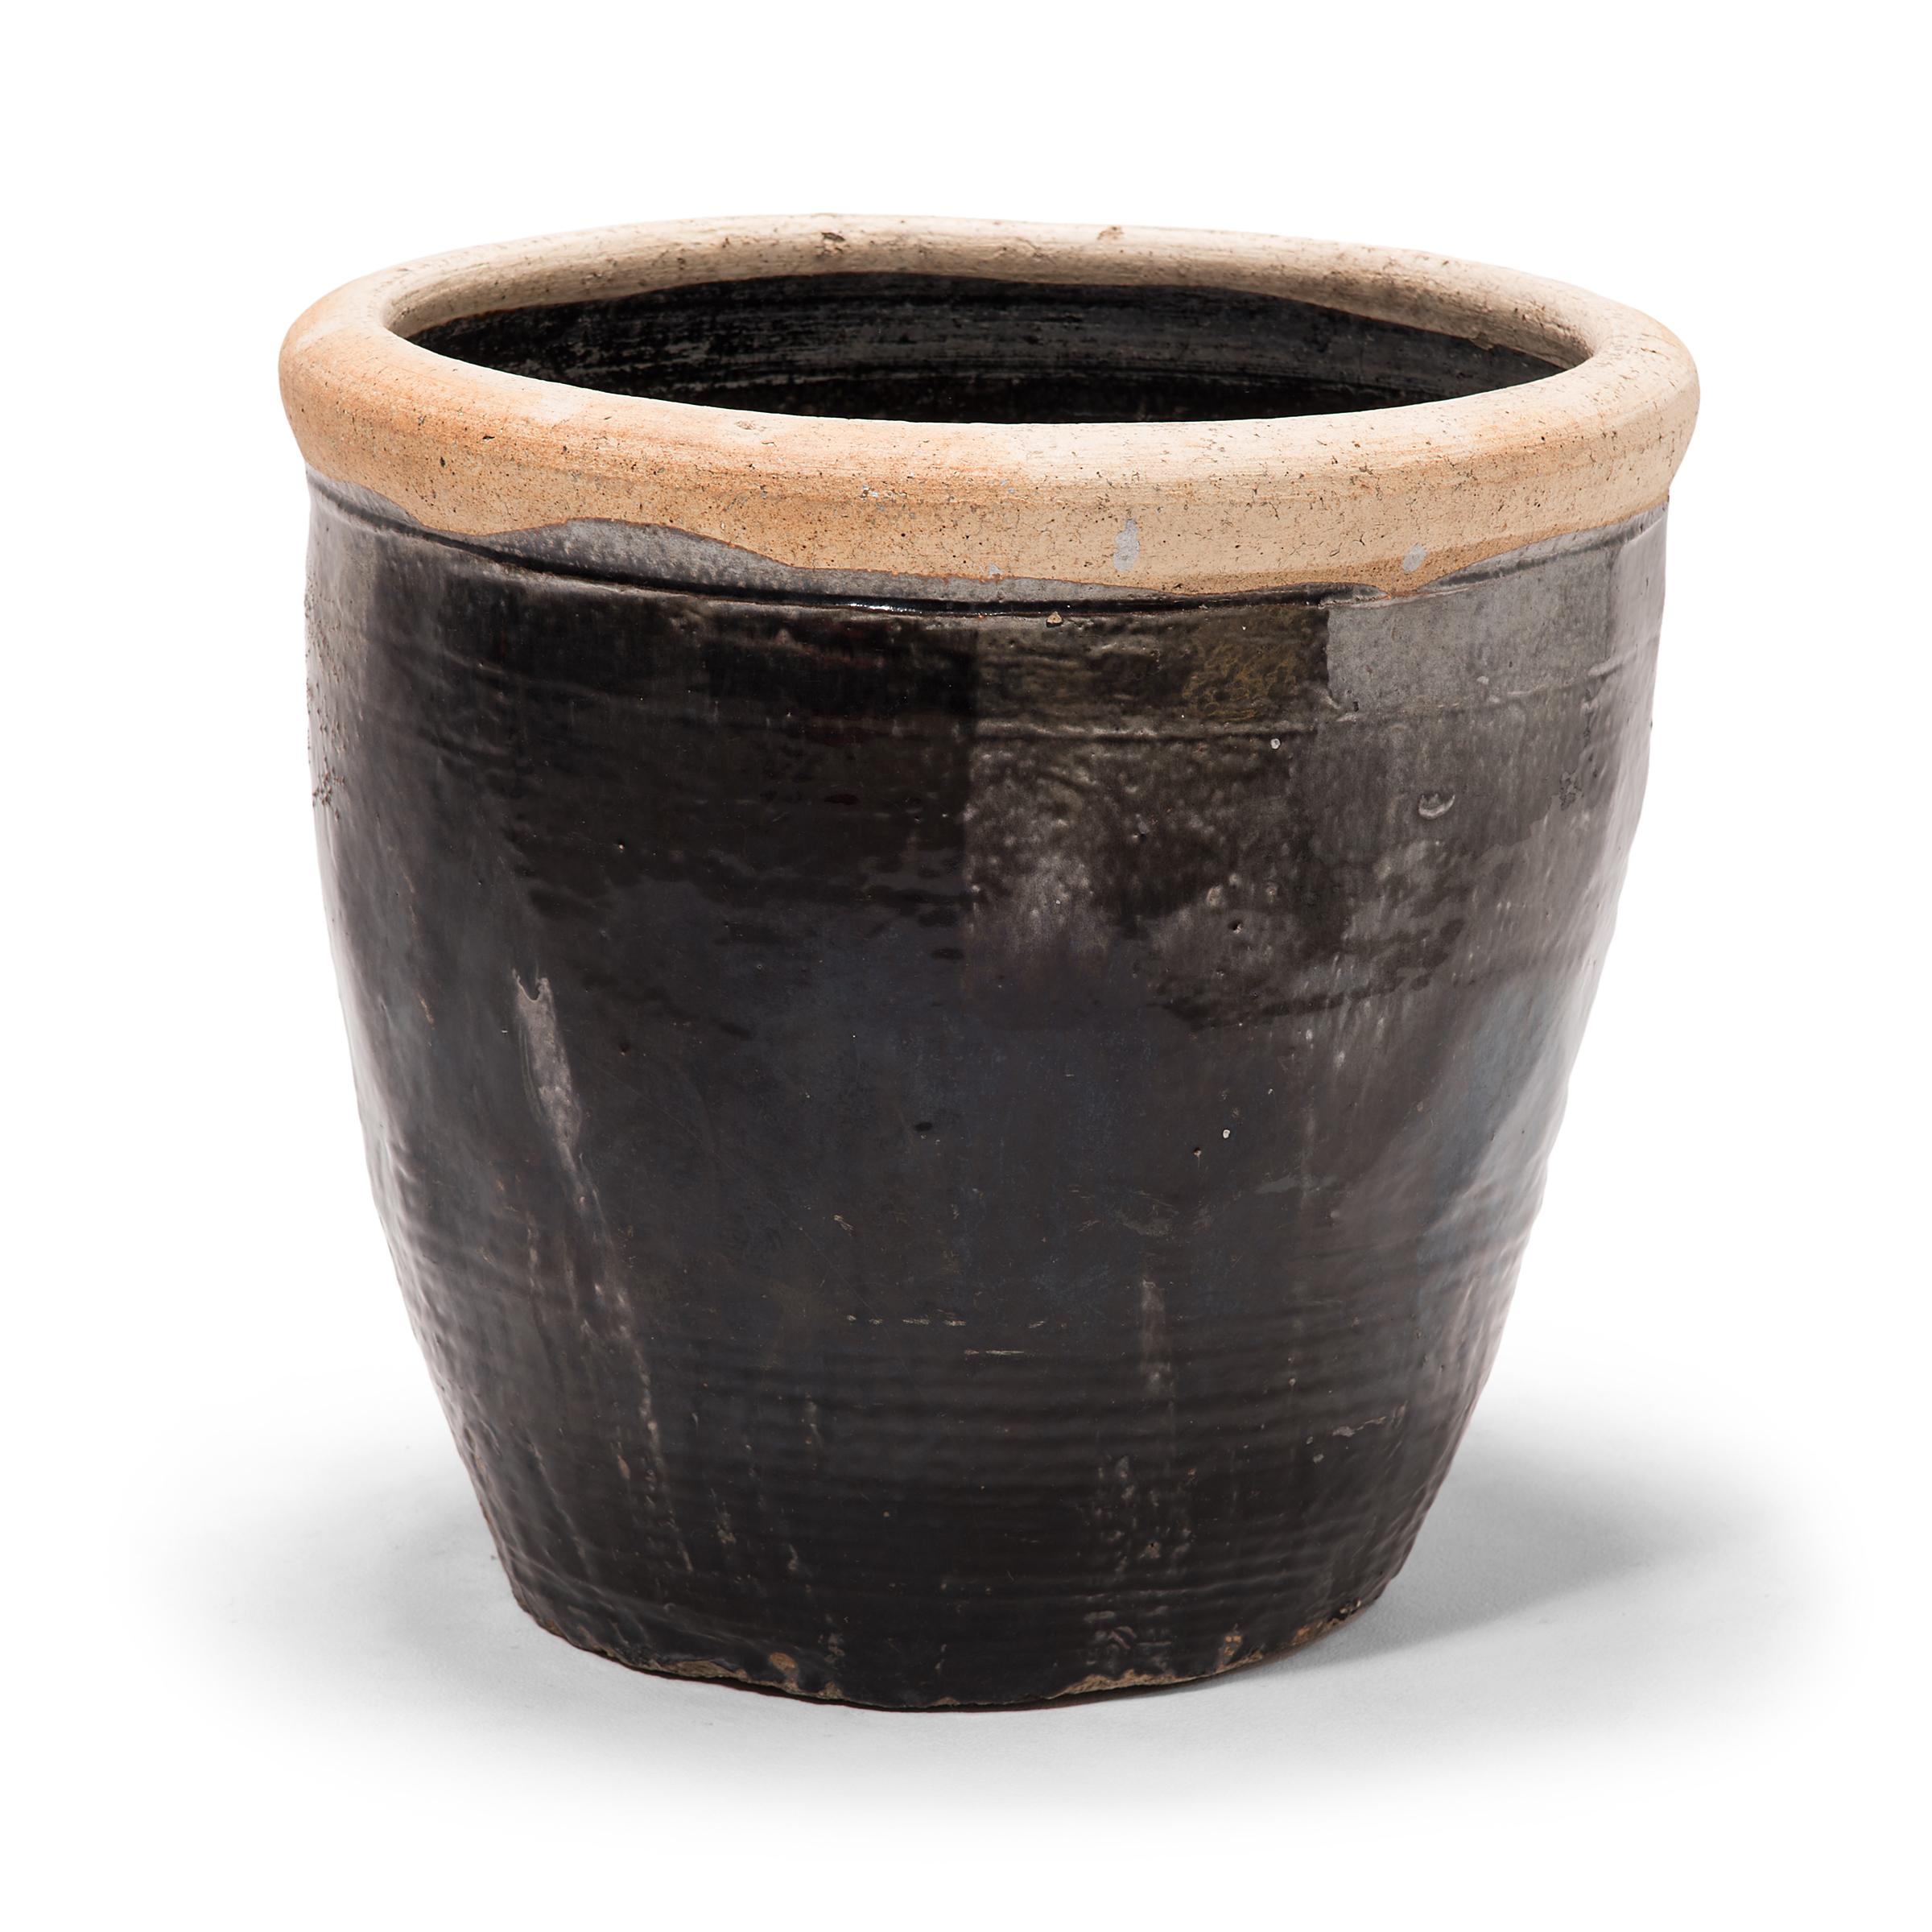 Originally used for pickling foods, this early 20th century vessel is coated inside and out with a dark glaze. Subtle ridges at the base suggest that the wide jar was fashioned by coiling flattened ropes of clay into the desired shape. Featuring an